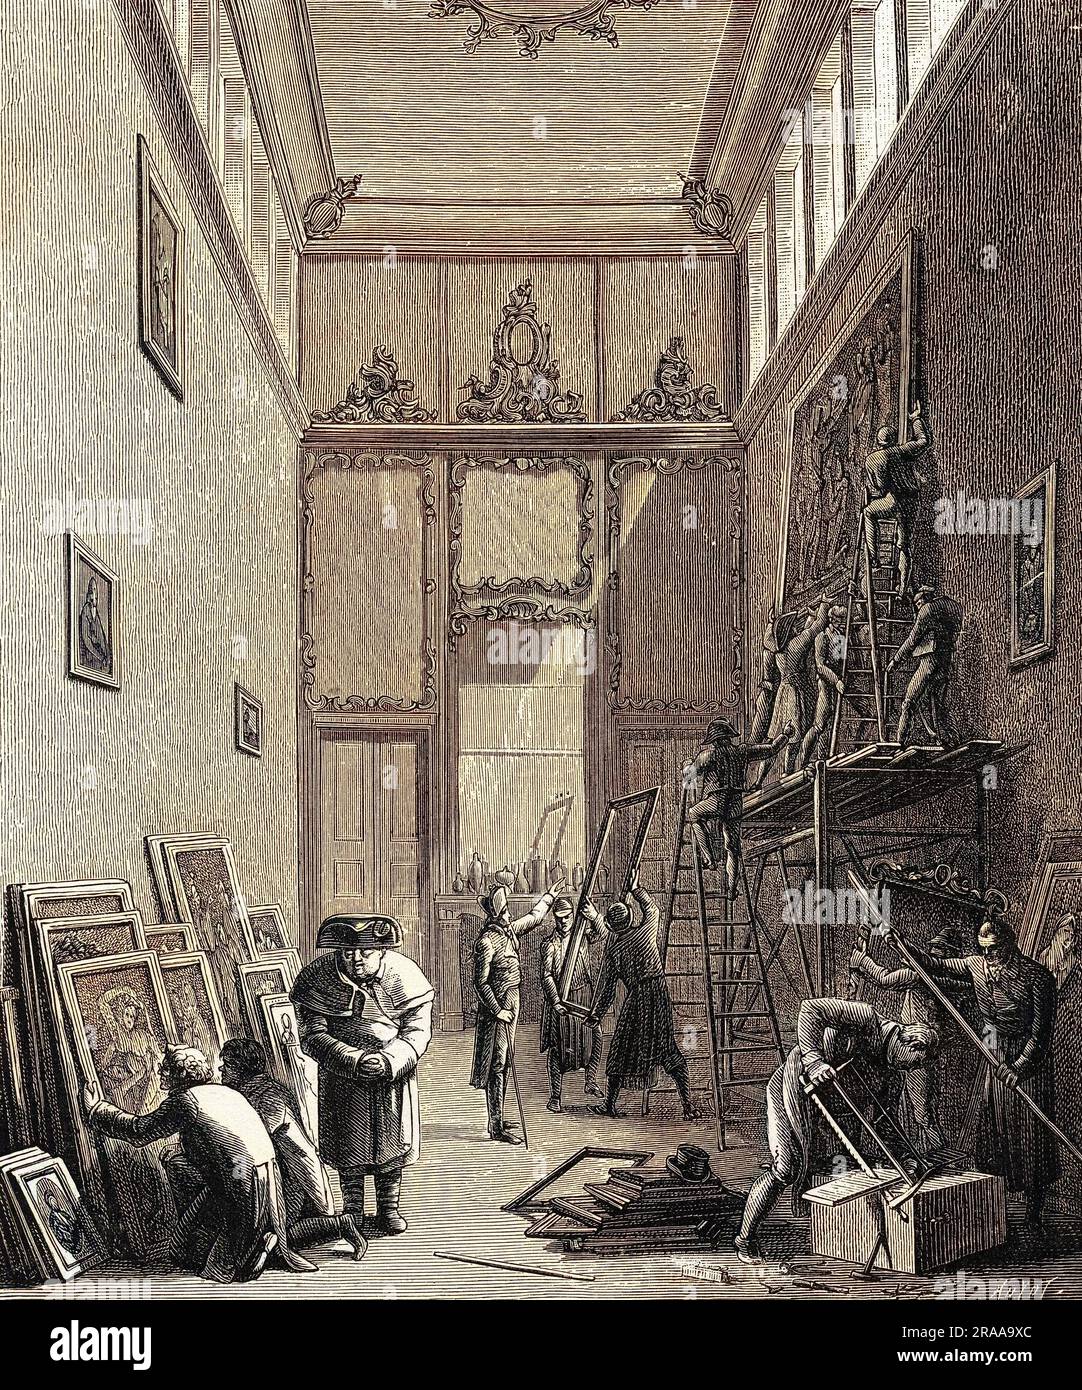 Removal of paintings and artworks from the Cassel gallery in Dresden by Napoleon's soldiers after the Battle of Dresden in 1813: a German caricature against Napoleon and Dominique Vivant Denon, who Napoleon made first director of the Louvre Museum in Paris, the implication being that Dresden's artworks are bolstering the holdings of the Louvre.     Date: C.1813 Stock Photo